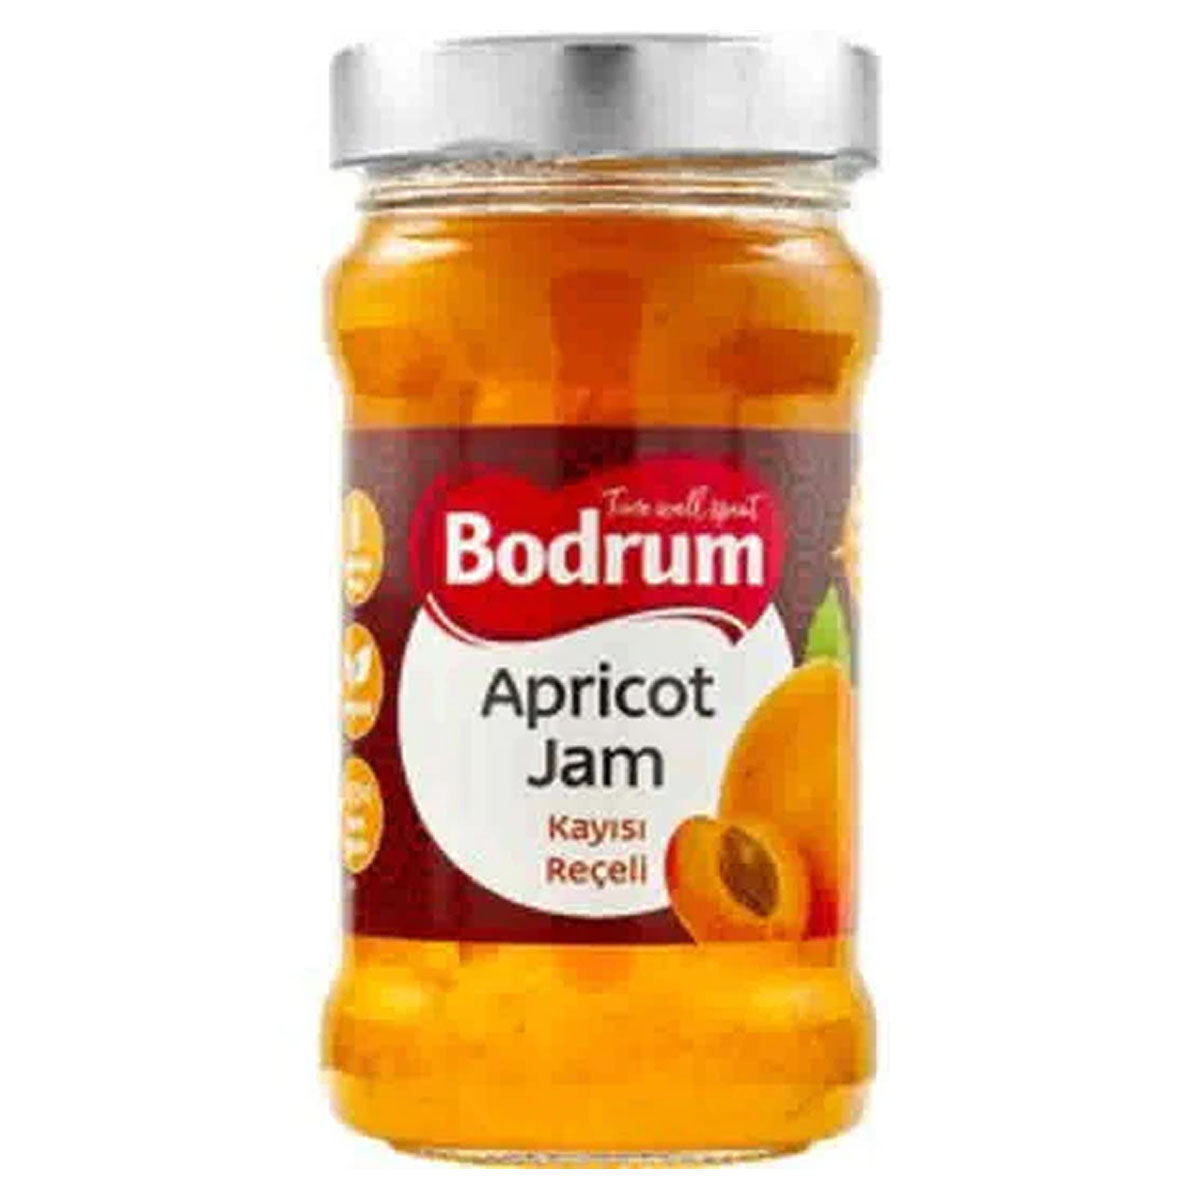 Bodrum - Apricot Jam - 380g - Continental Food Store